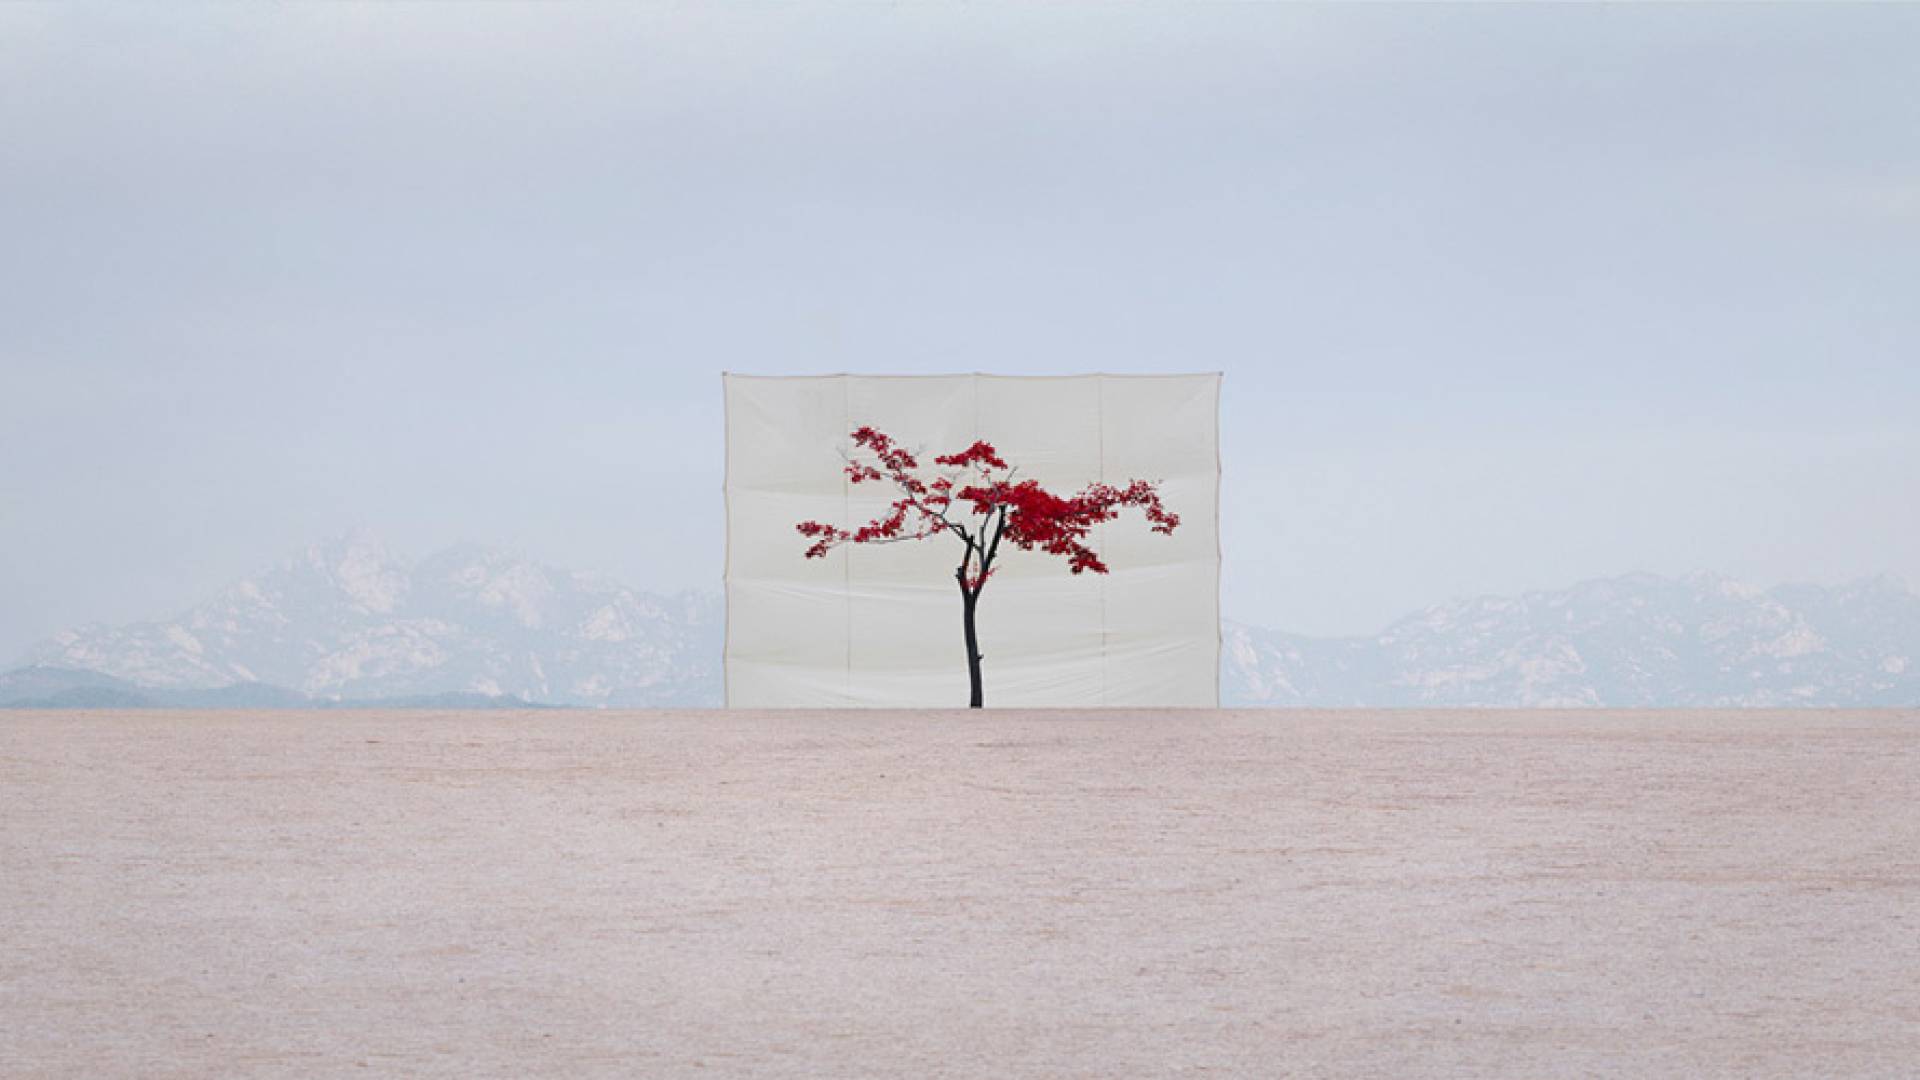 Tree with red blossoms in field with white backdrop behind.